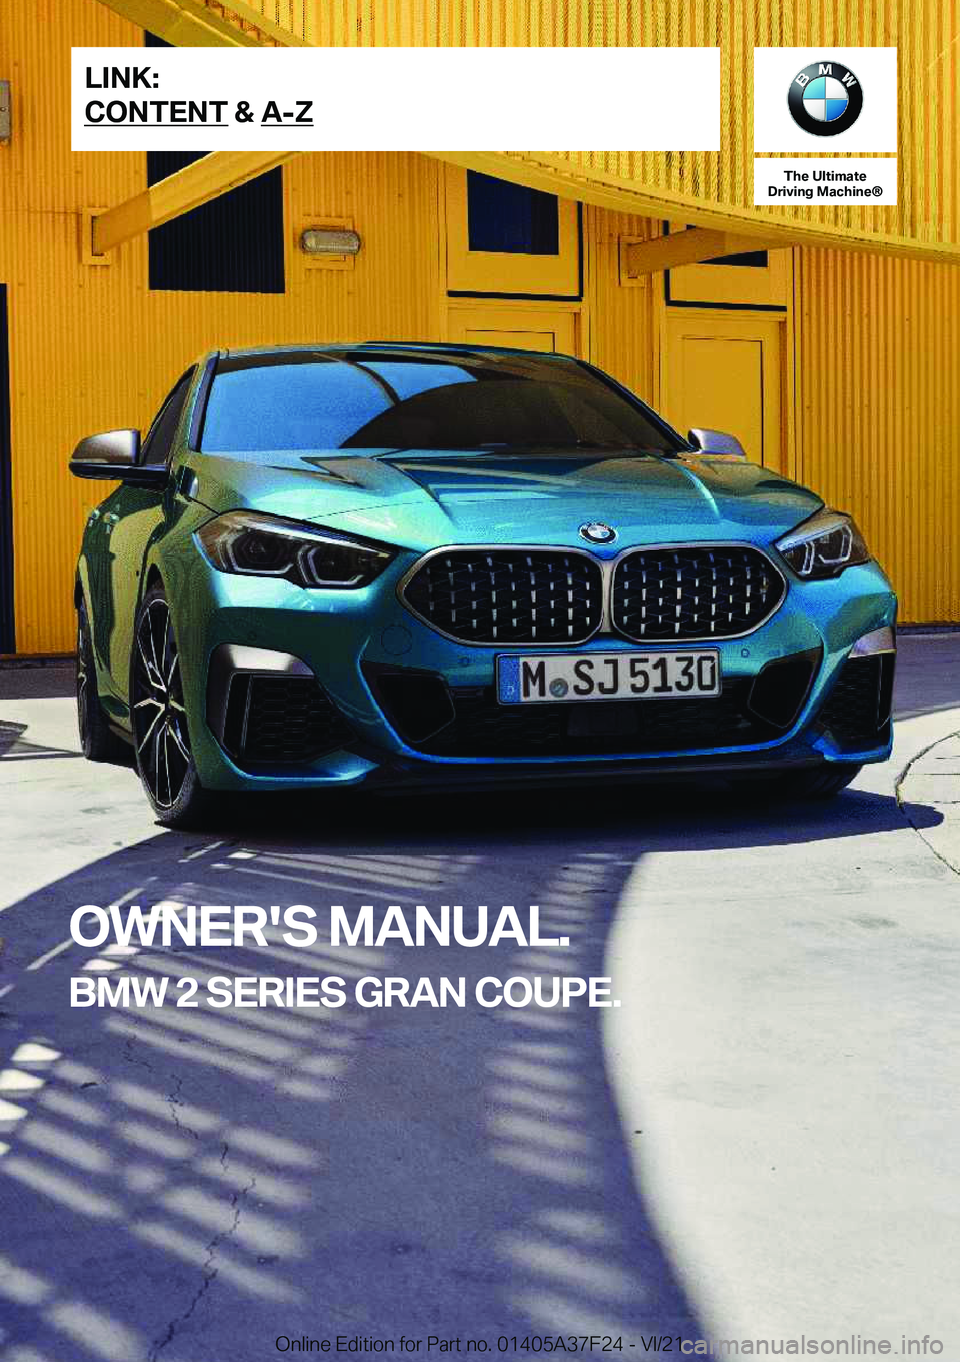 BMW 2 SERIES GRAN COUPE 2022  Owners Manual �T�h�e��U�l�t�i�m�a�t�e
�D�r�i�v�i�n�g��M�a�c�h�i�n�e�n
�O�W�N�E�R�'�S��M�A�N�U�A�L�.
�B�M�W��2��S�E�R�I�E�S��G�R�A�N��C�O�U�P�E�.�L�I�N�K�:
�C�O�N�T�E�N�T��&��A�-�Z�O�n�l�i�n�e��E�d�i�t